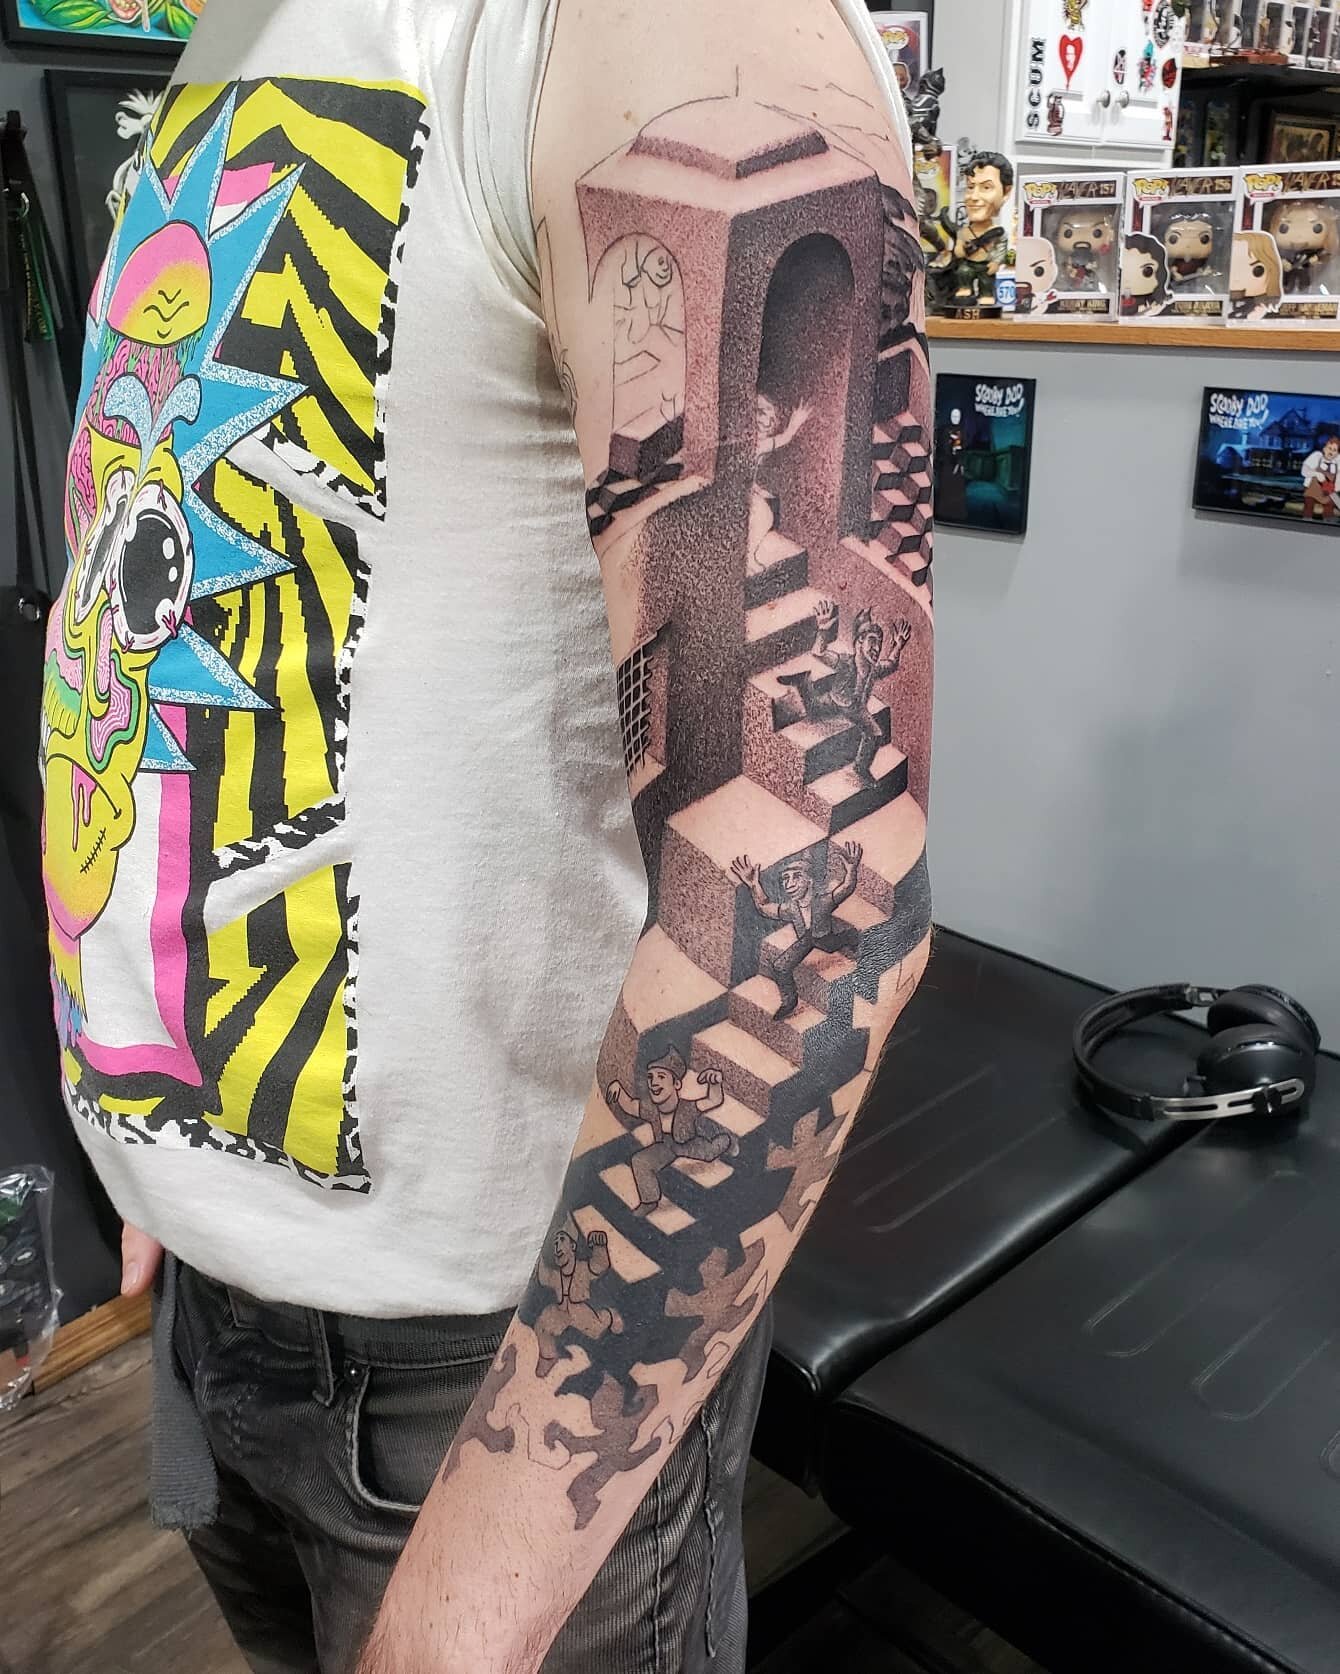 Check out this crazy MC Escher sleeve I've been lucky enough to tattoo! Thanks Jesh!!!
.
.
.
#LightningRevivalTattooCompany #LightningRevivalTattooCo #LightningRevivalTattoo #LightningRevival #LRTC #LRNate #mcescher #sleeve #sleevetattoo #dot #dots #